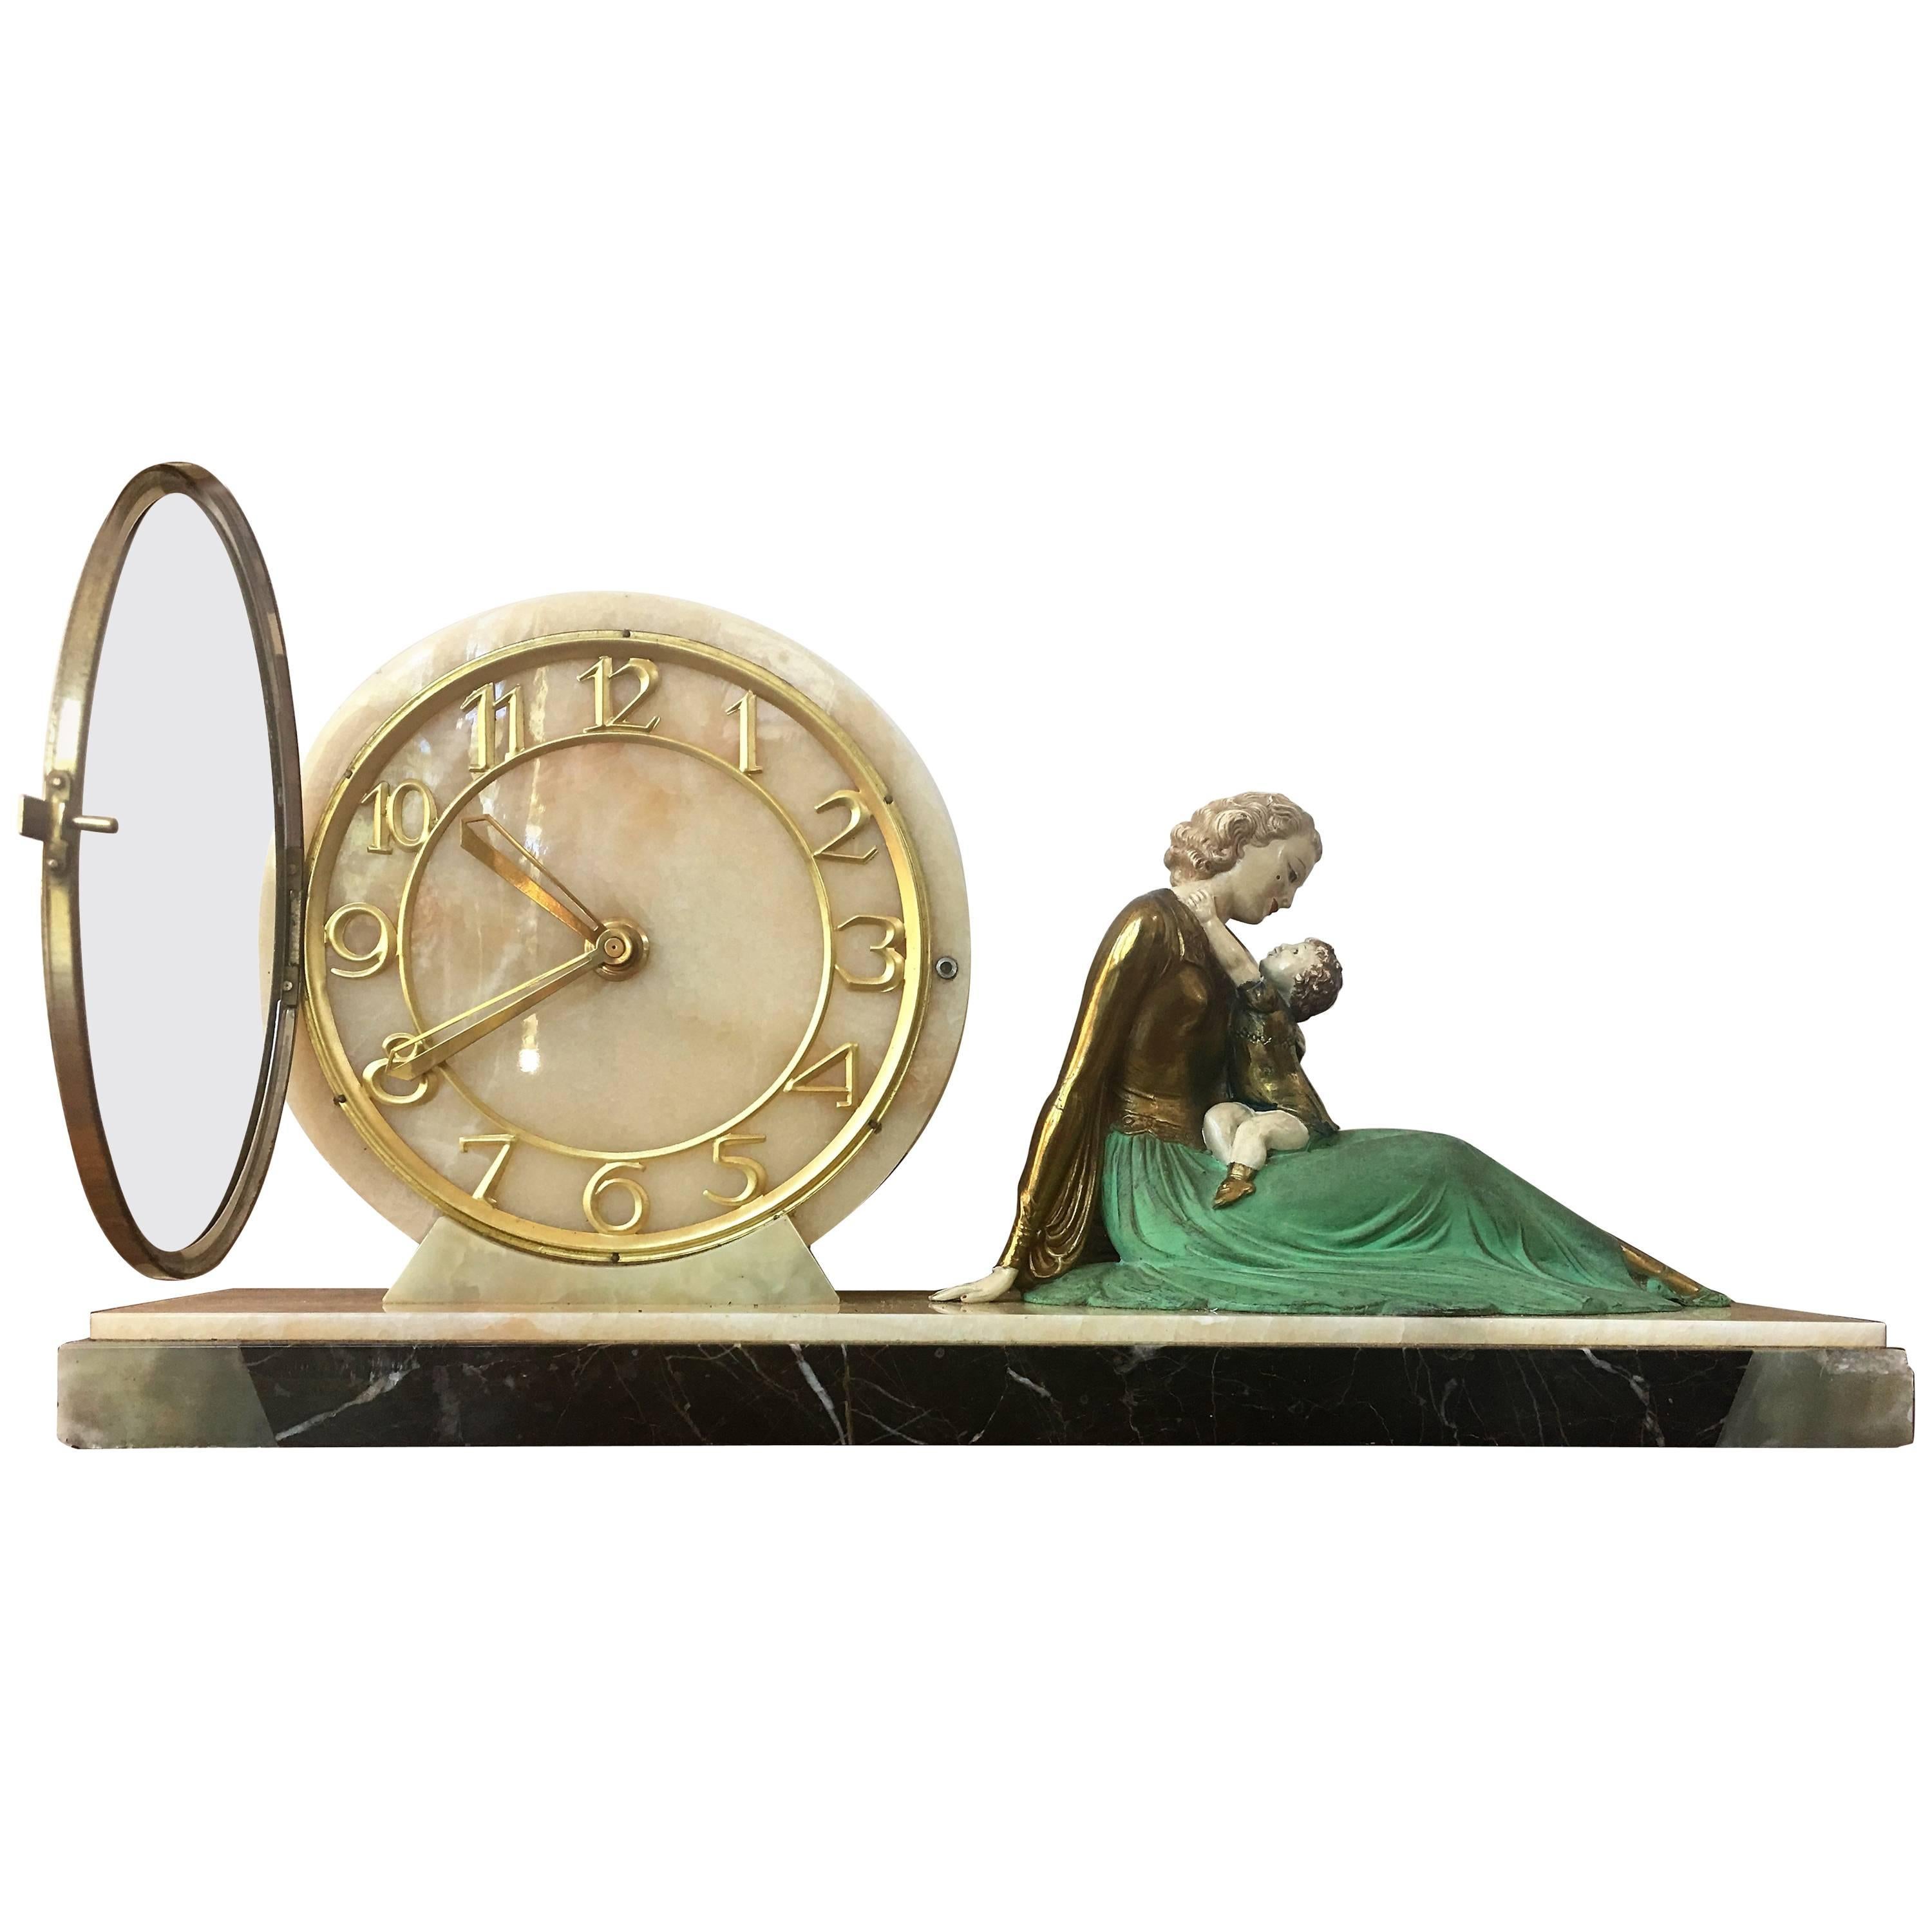 Art Deco Clock with Figurine, circa 1920 Signed by J.Roggia, France